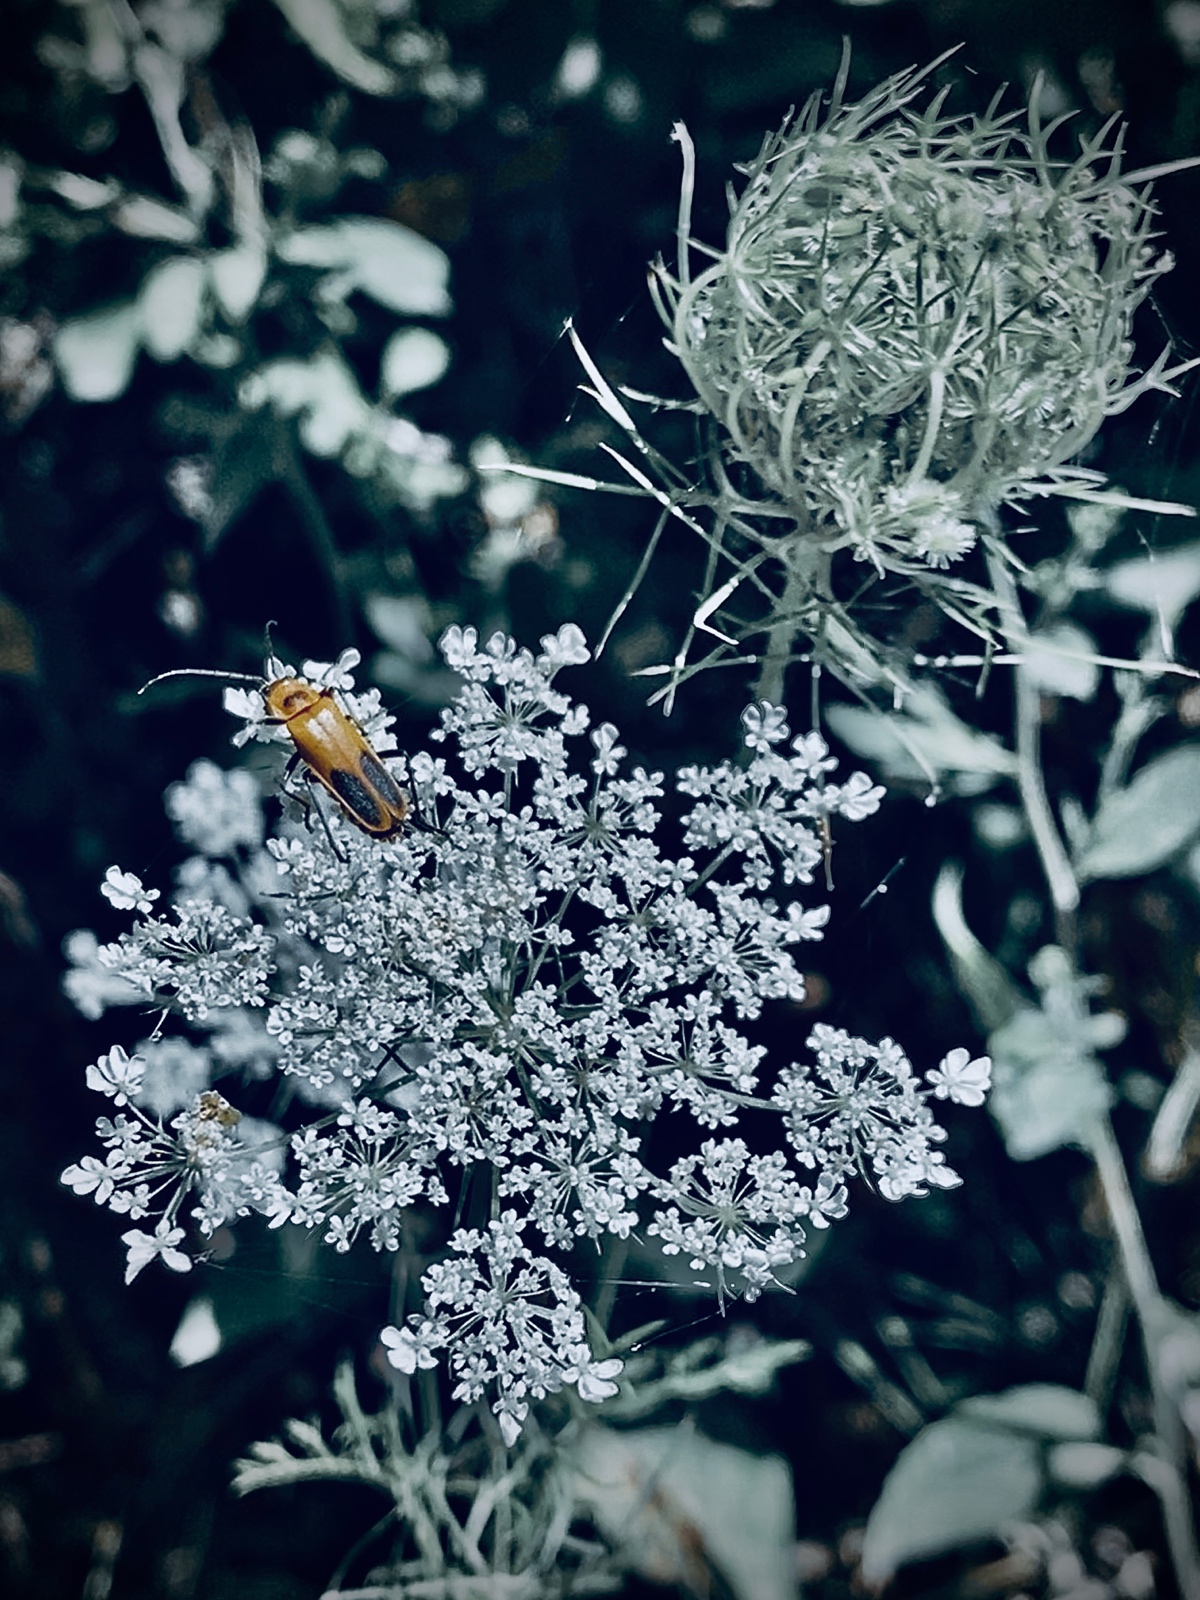 Beetle on Queen Anne’s Lace